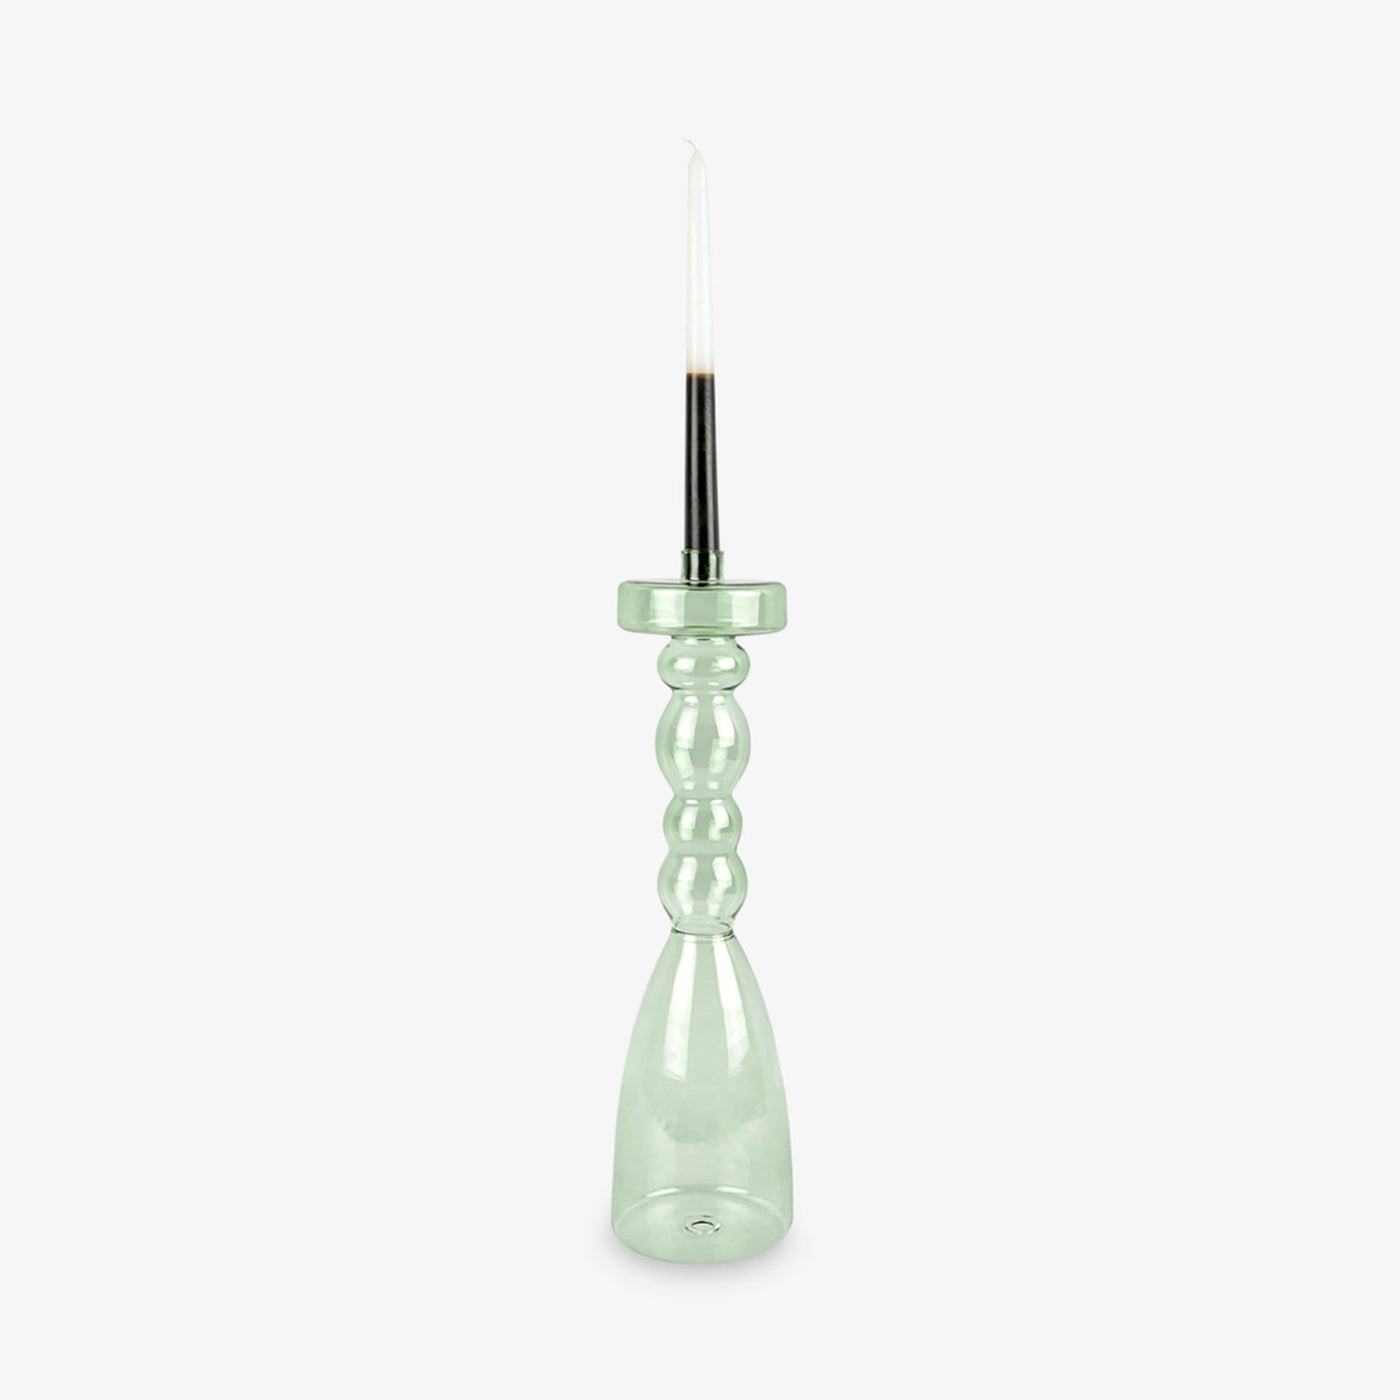 Ludou Candle Holder, Glass, Jungle Green, XL Candle Holders sazy.com